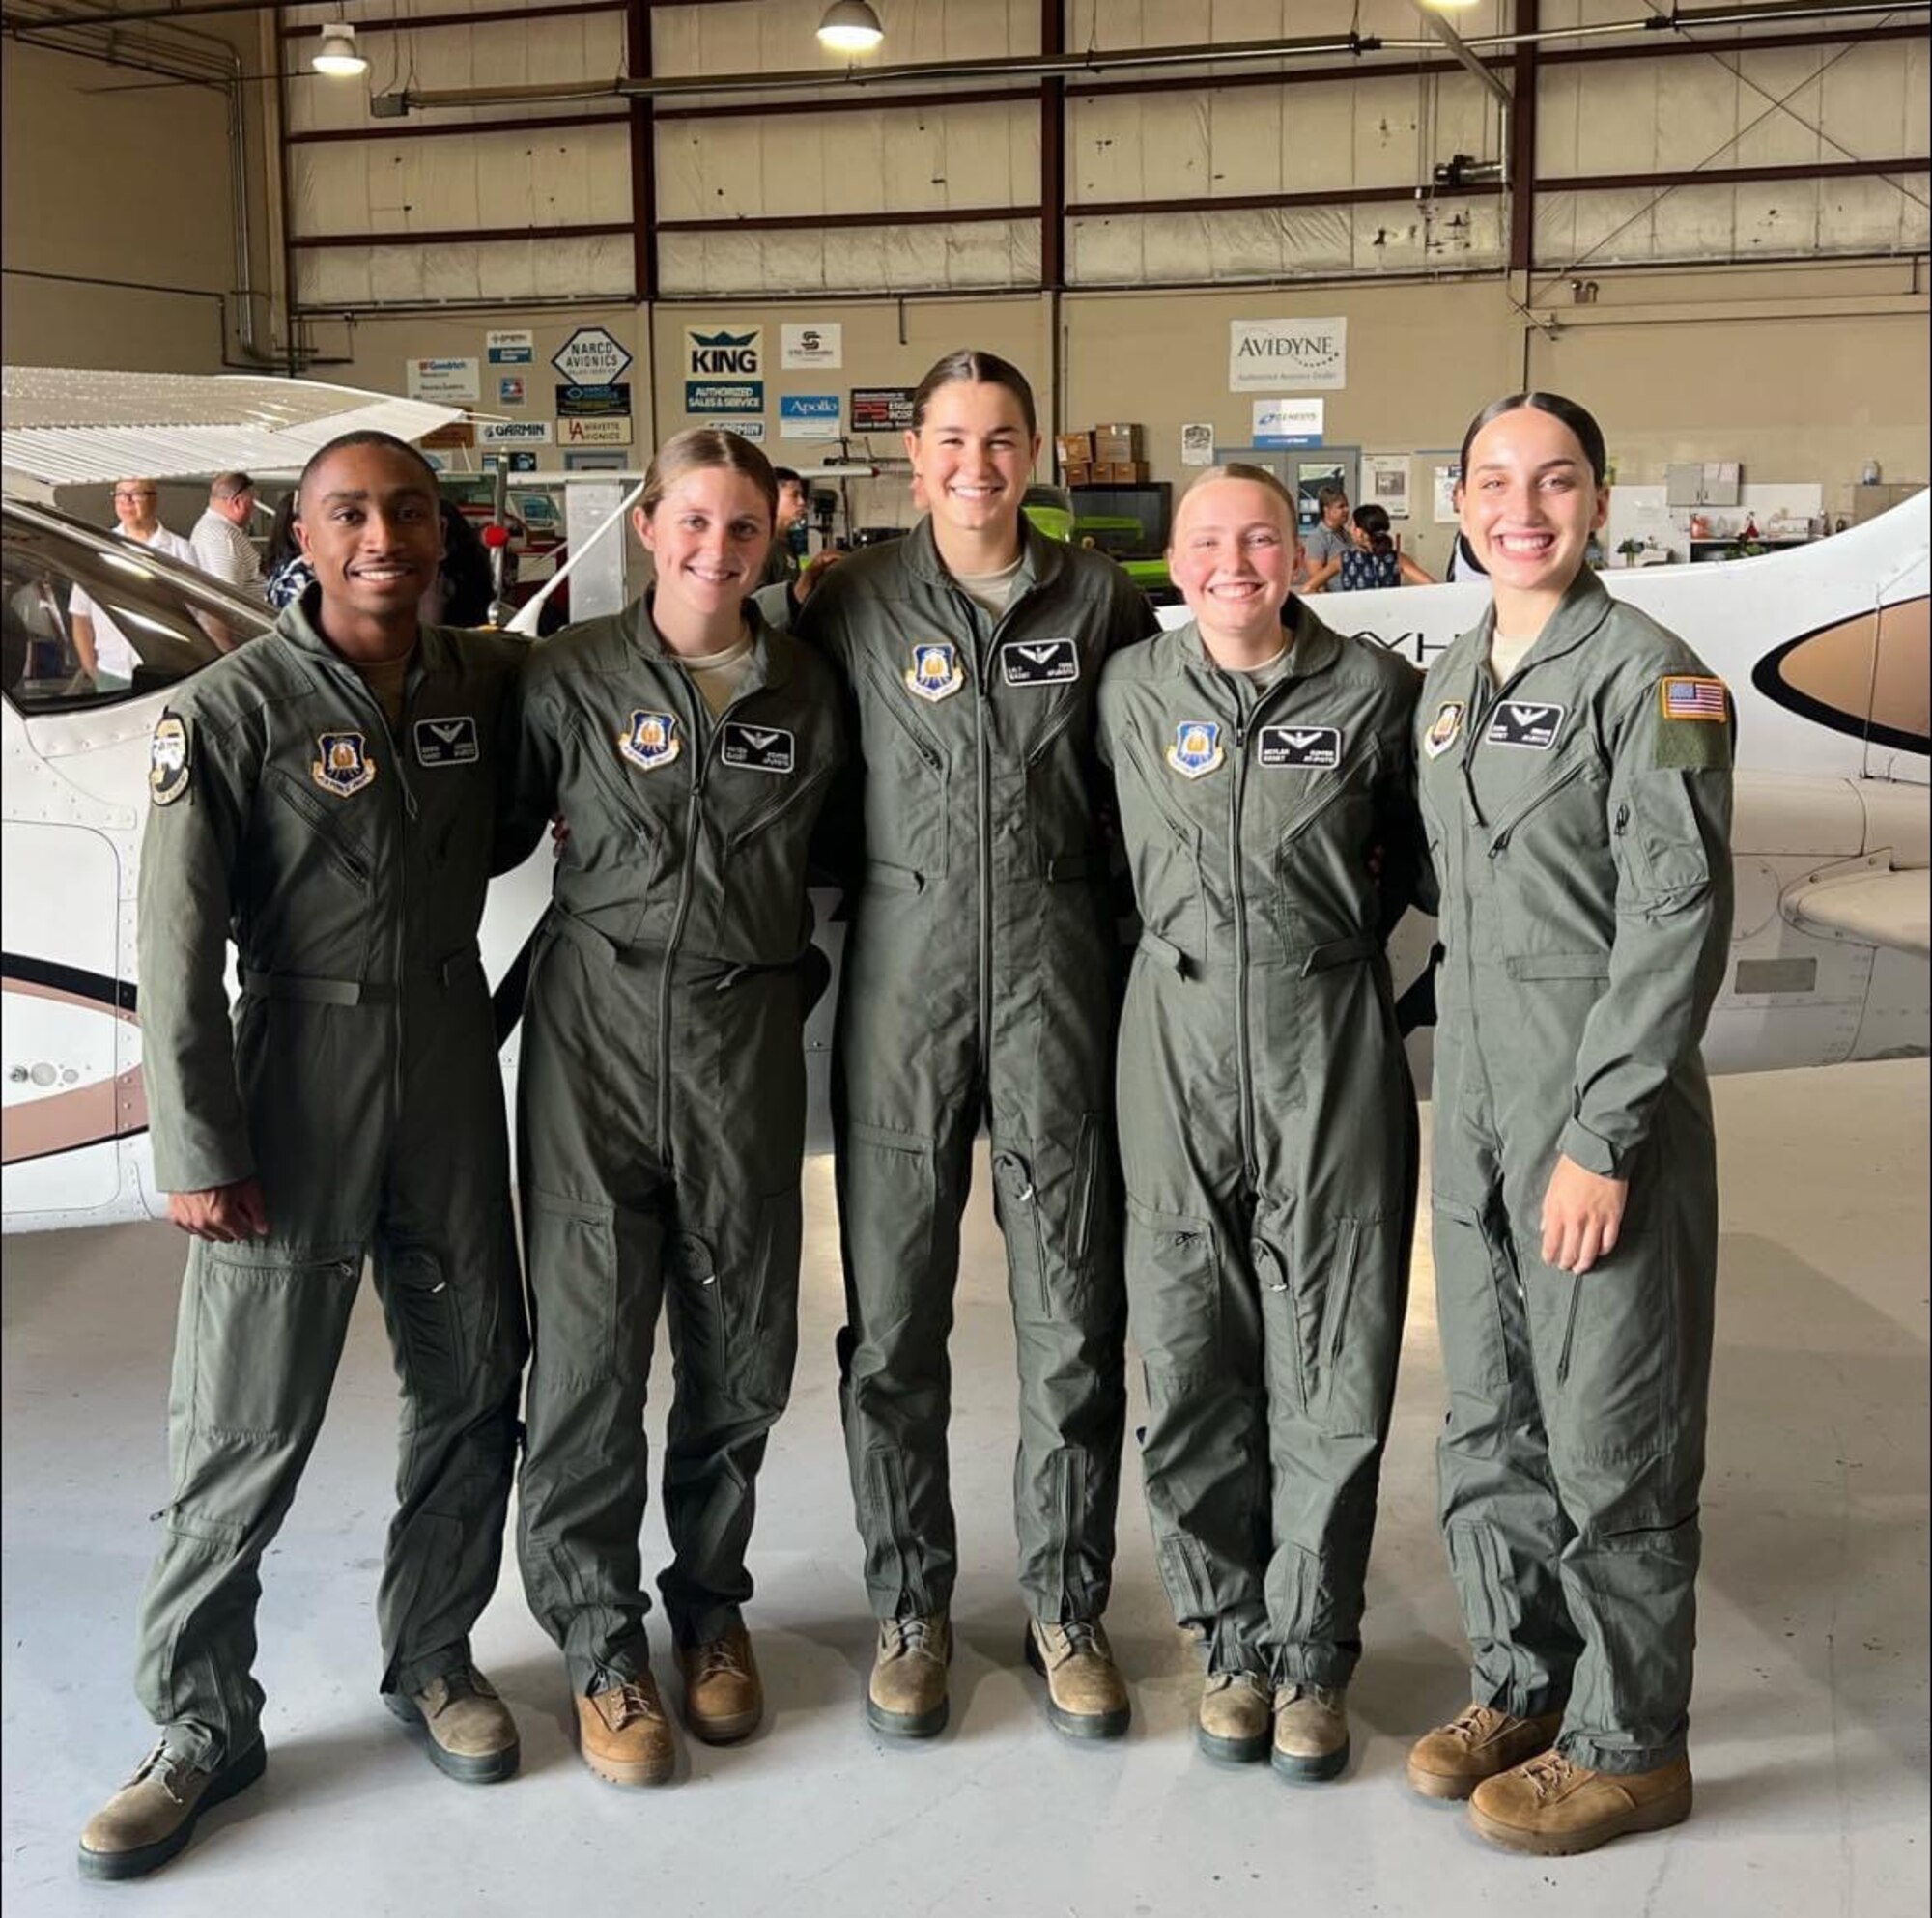 Since the summer of 2018, 1,089 cadets have participated in the Air Force Junior ROTC Flight Academy program, such as those pictured at Purdue University, West Lafayette, Ind., this summer. Of the 1,089 cadets, 861 succeeded in earning their private pilot certificate through the program. In the program’s first year, six universities participated by offering the eight-week pilot training course. That number has grown to 24 participating universities in 2023. (Courtesy photo)